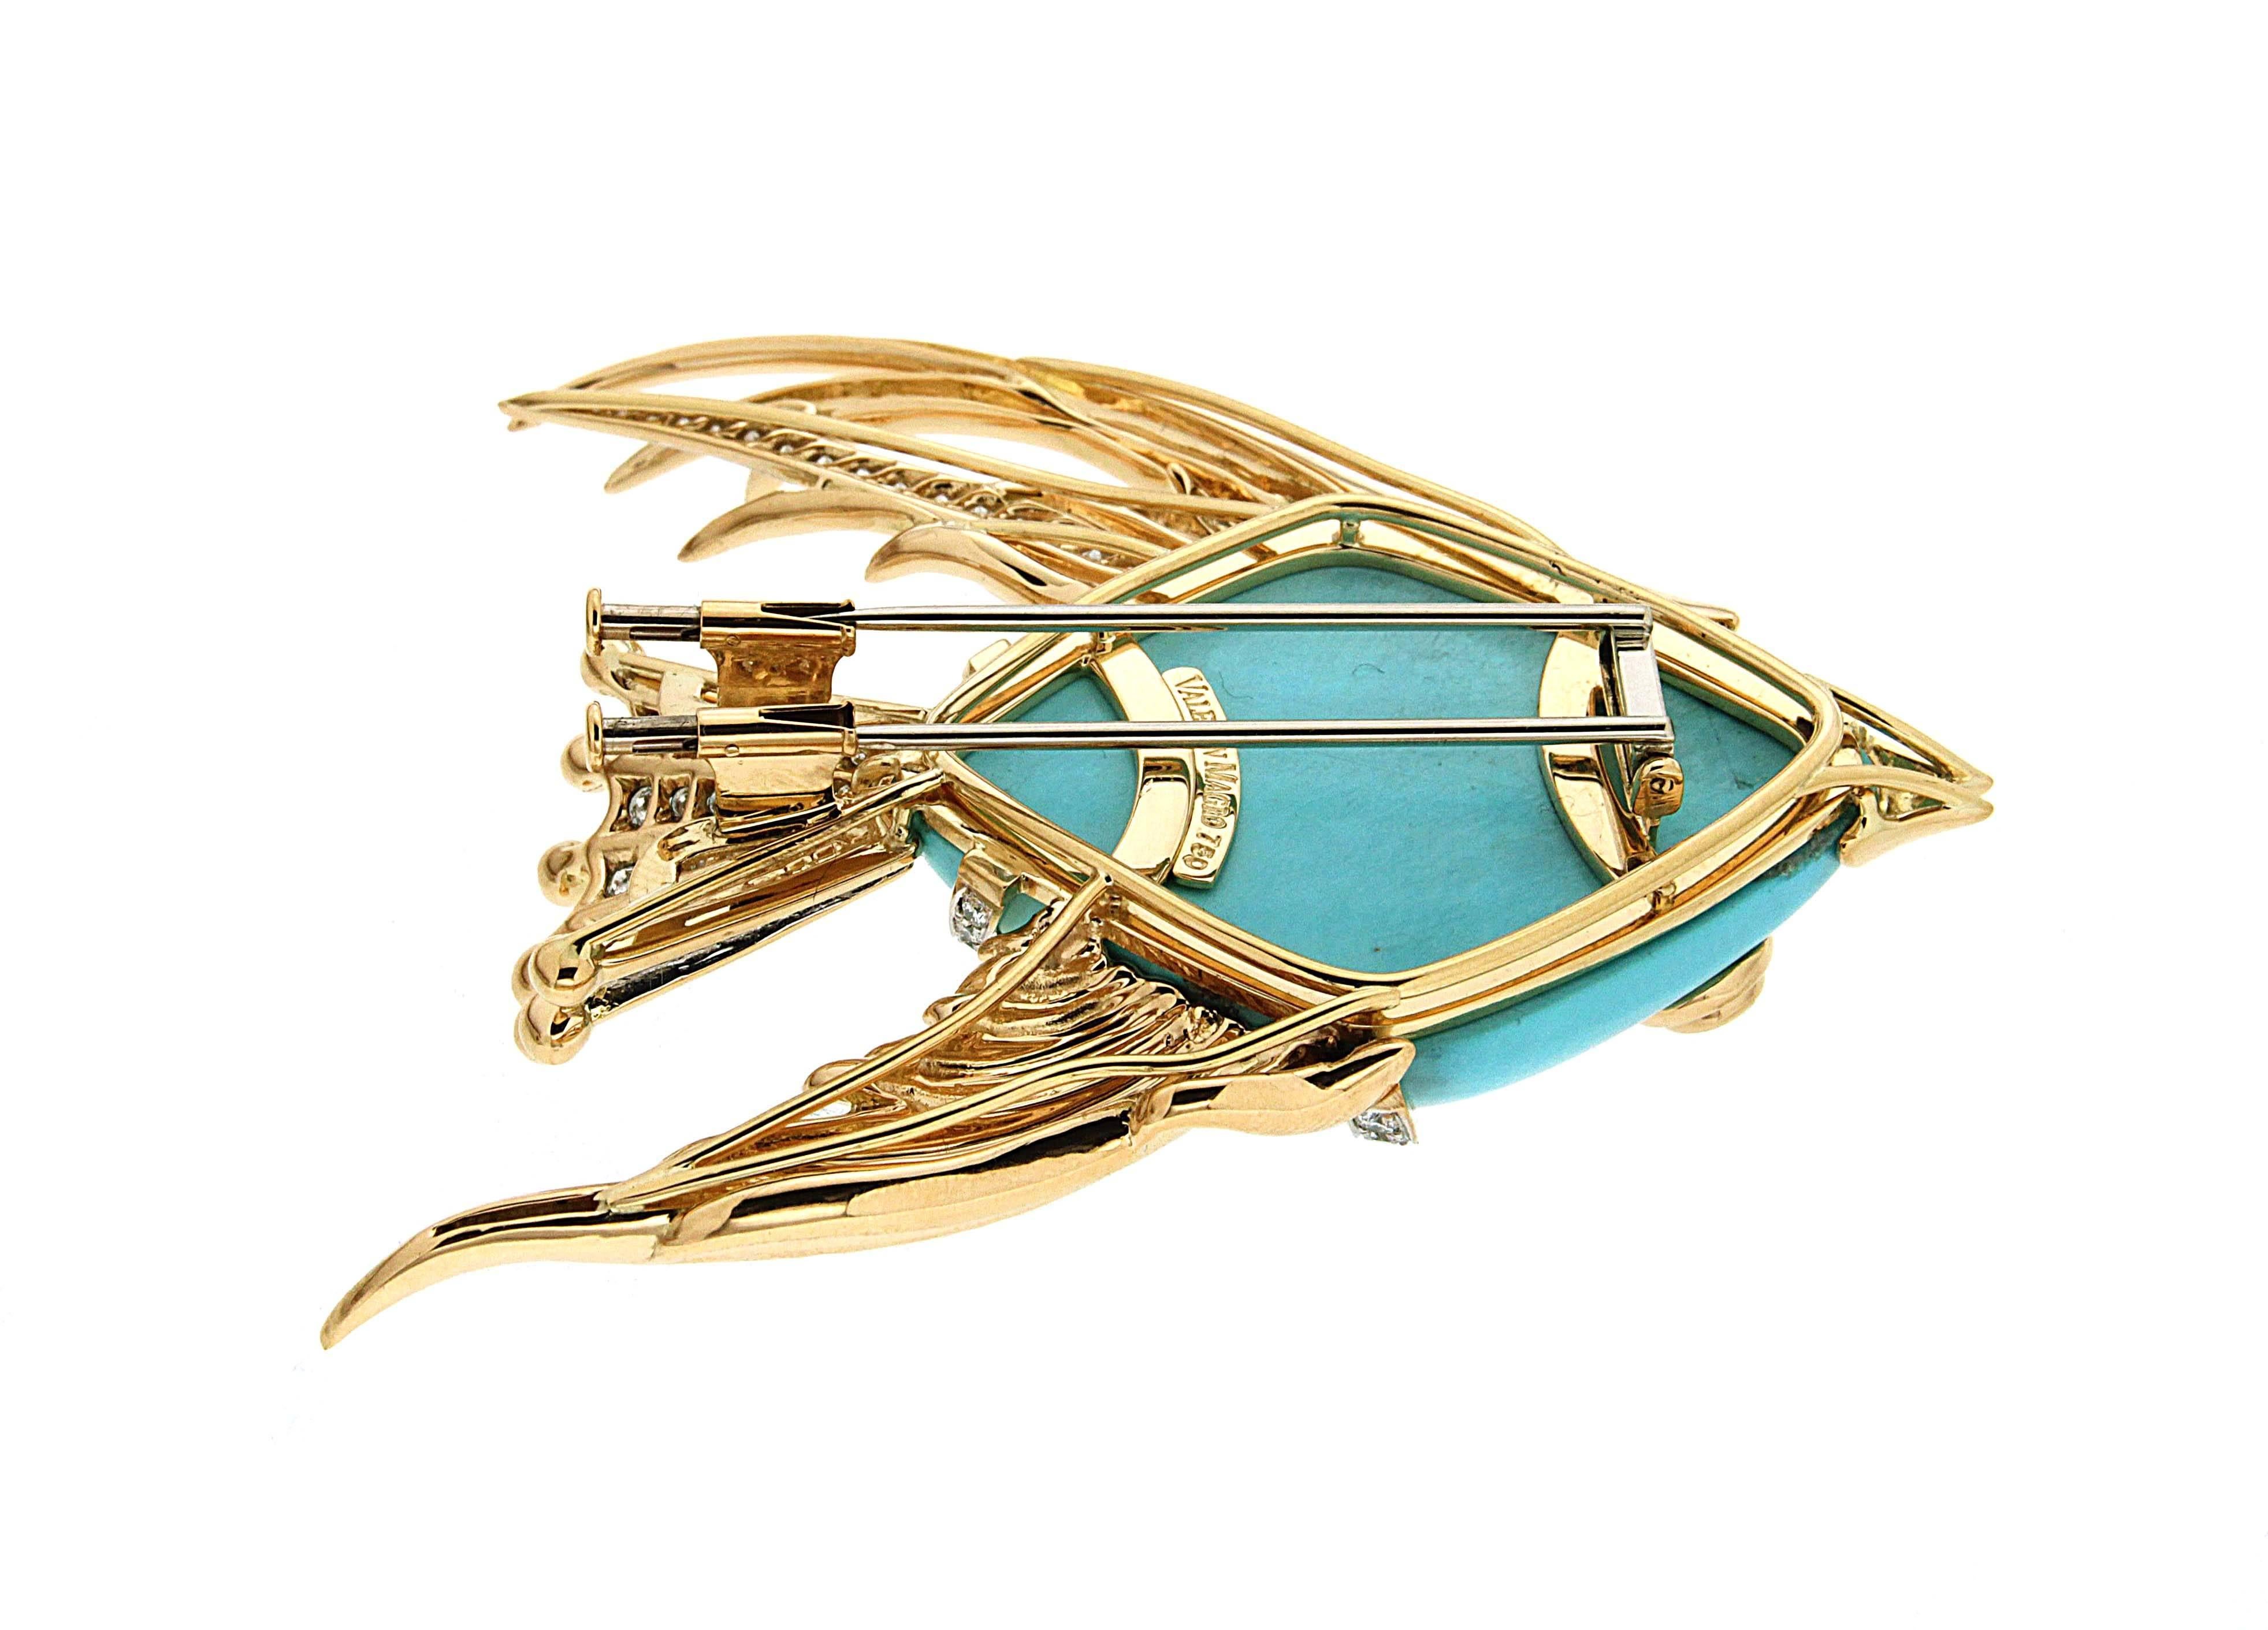 This lovely fish brooch is made in 18kt yellow gold and platinum with special cut turquoise and 2.63 carat total weight of round brilliant diamonds.